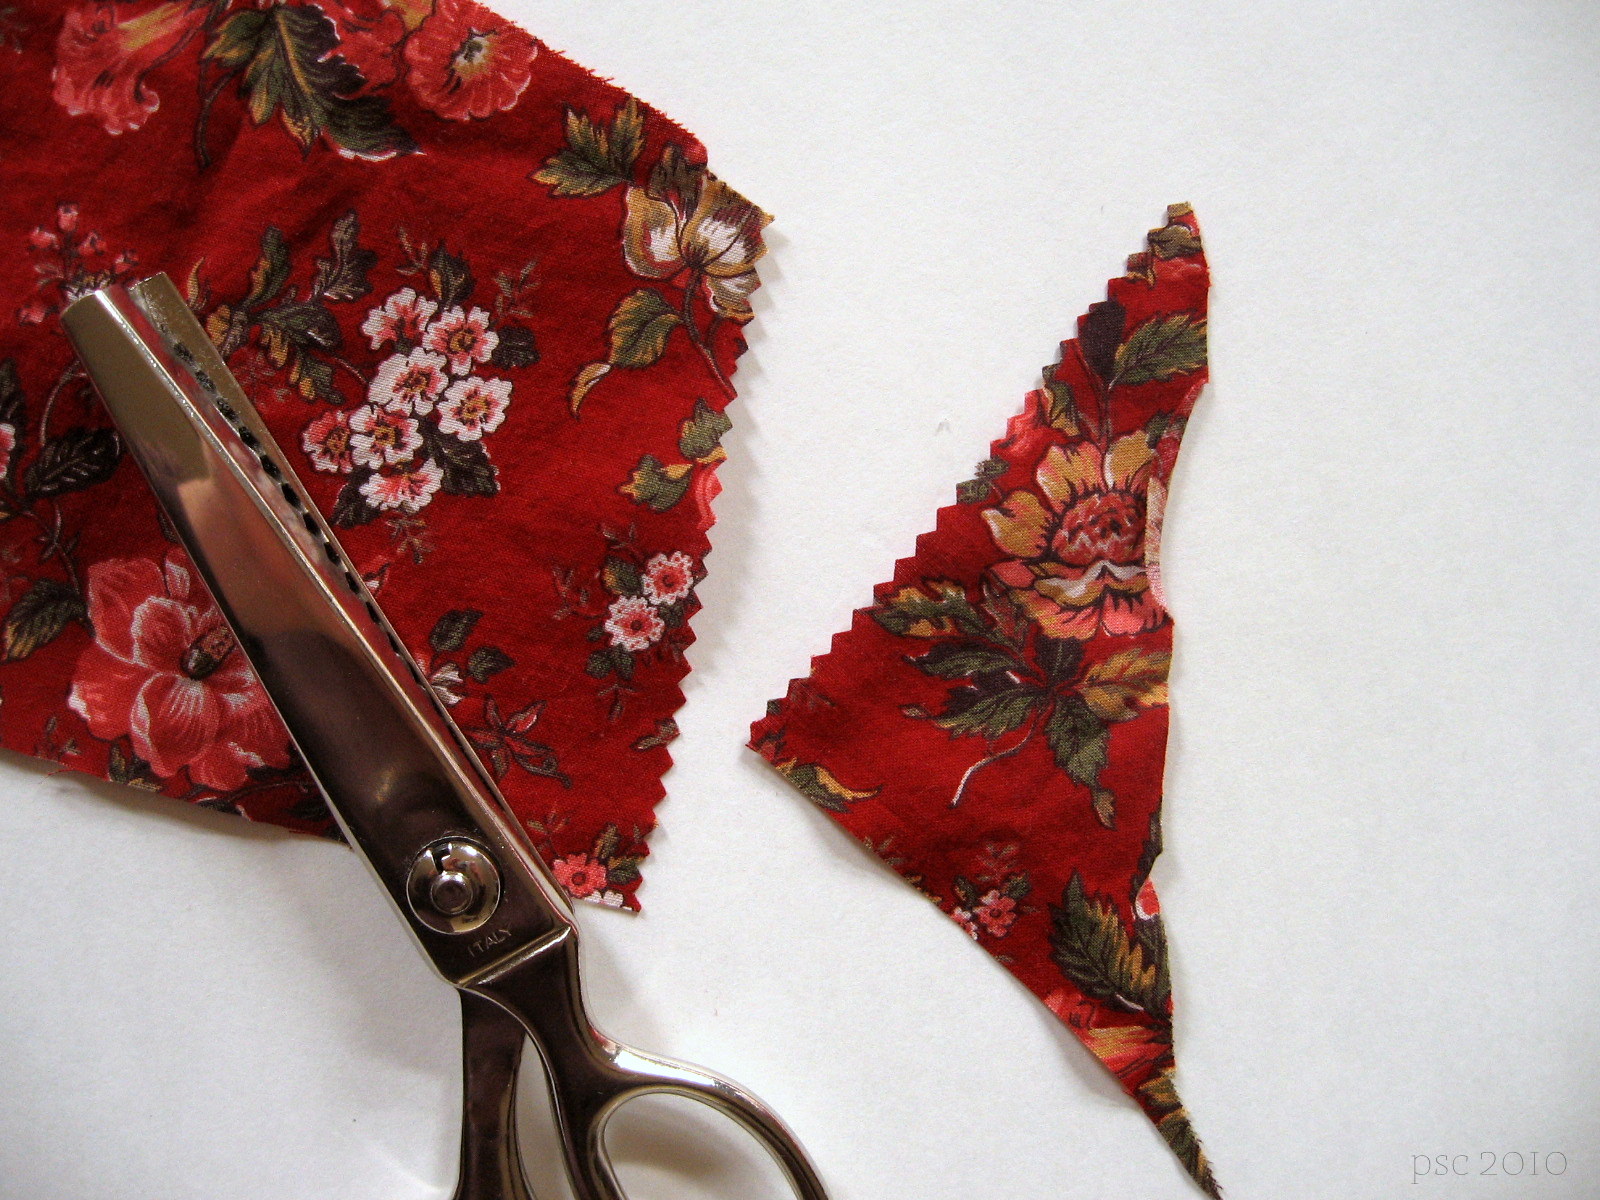 Pinking Shears Scissors for Fabric, Paper, Ribbon